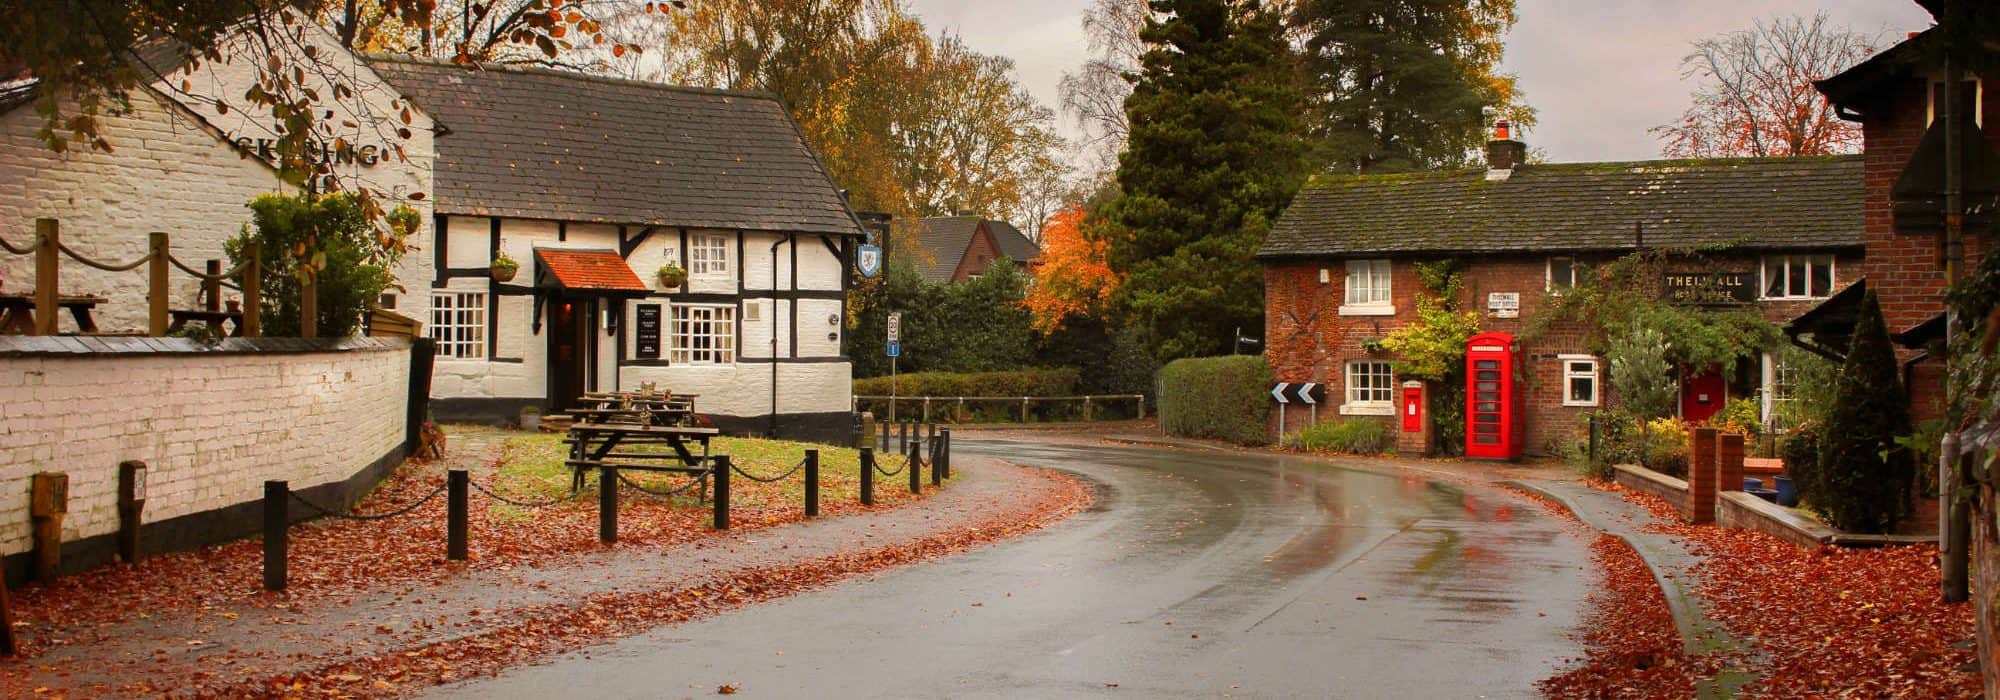 Thelwall Village after a rainy day